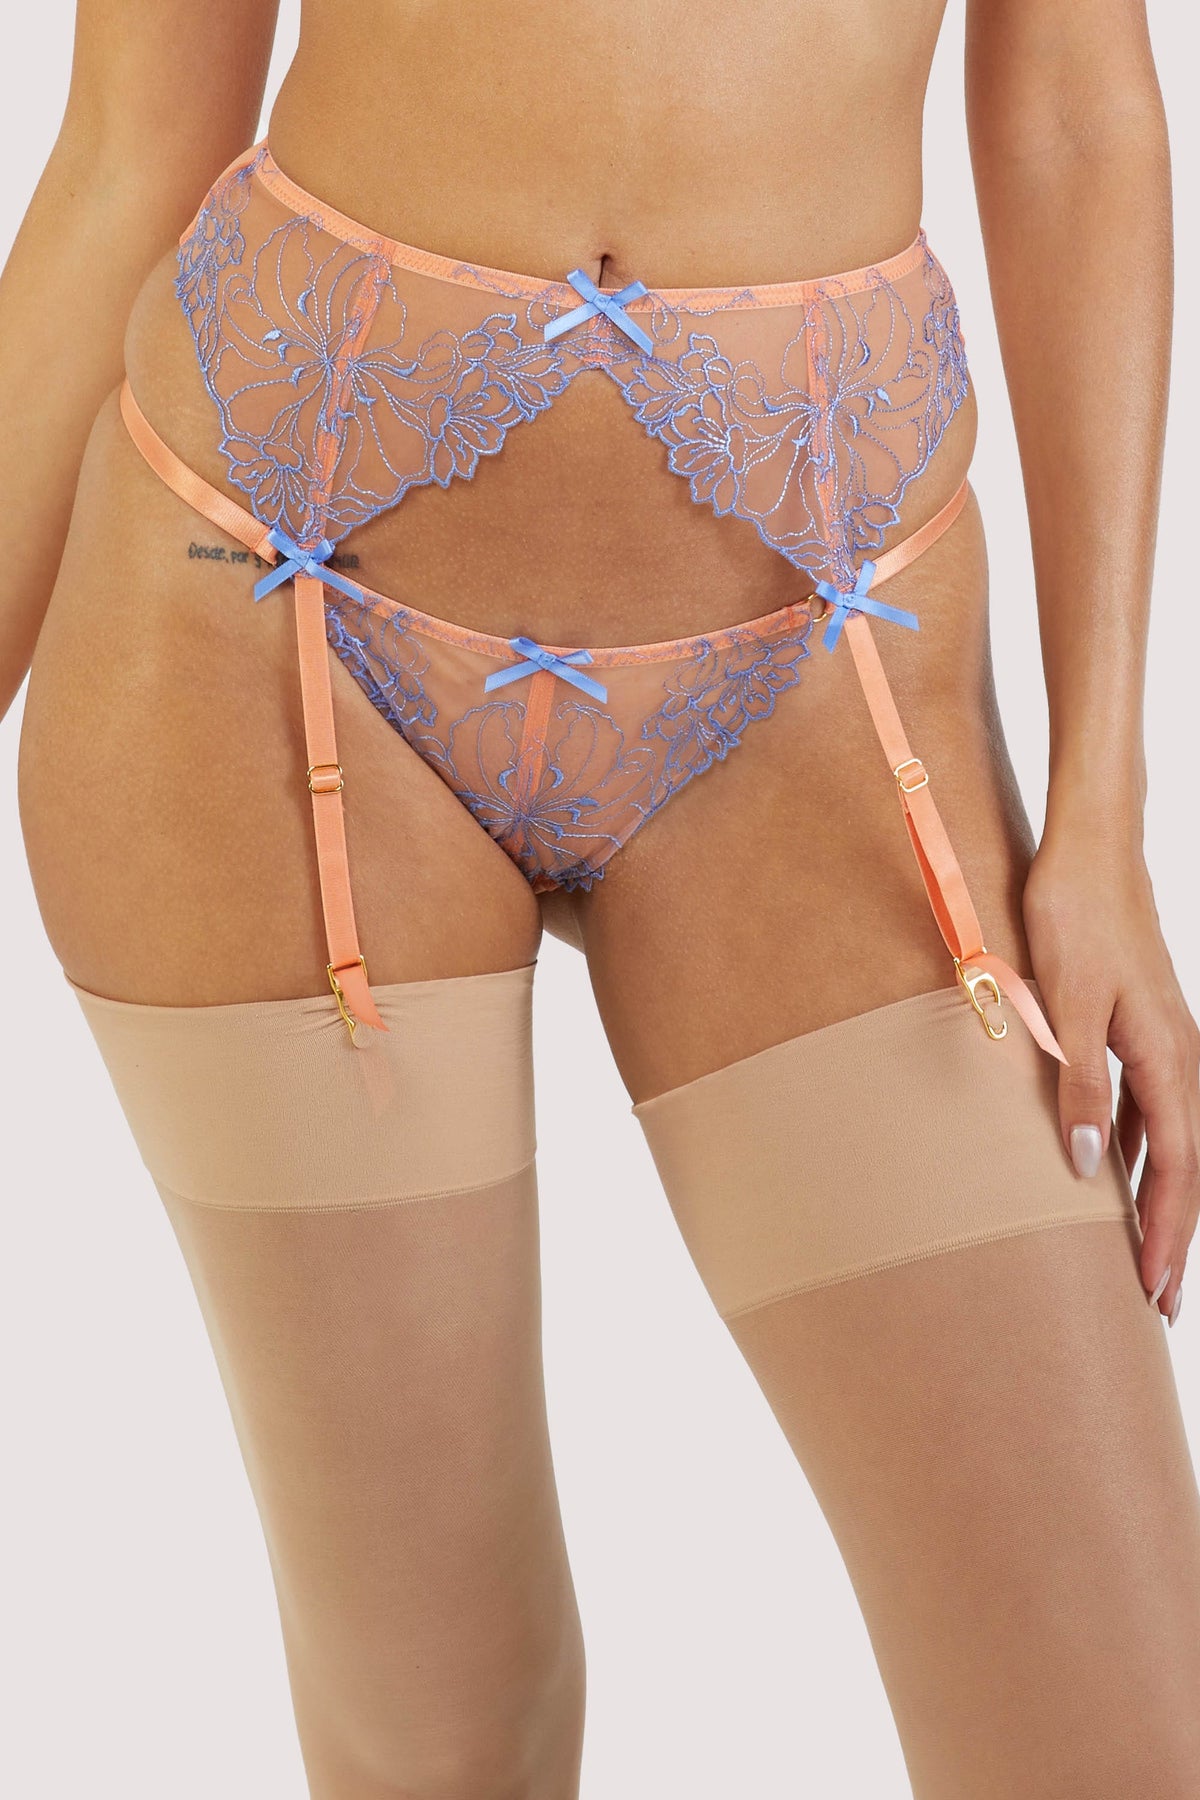 Orange mesh suspender with lacy blue-lilac detailing on the front.